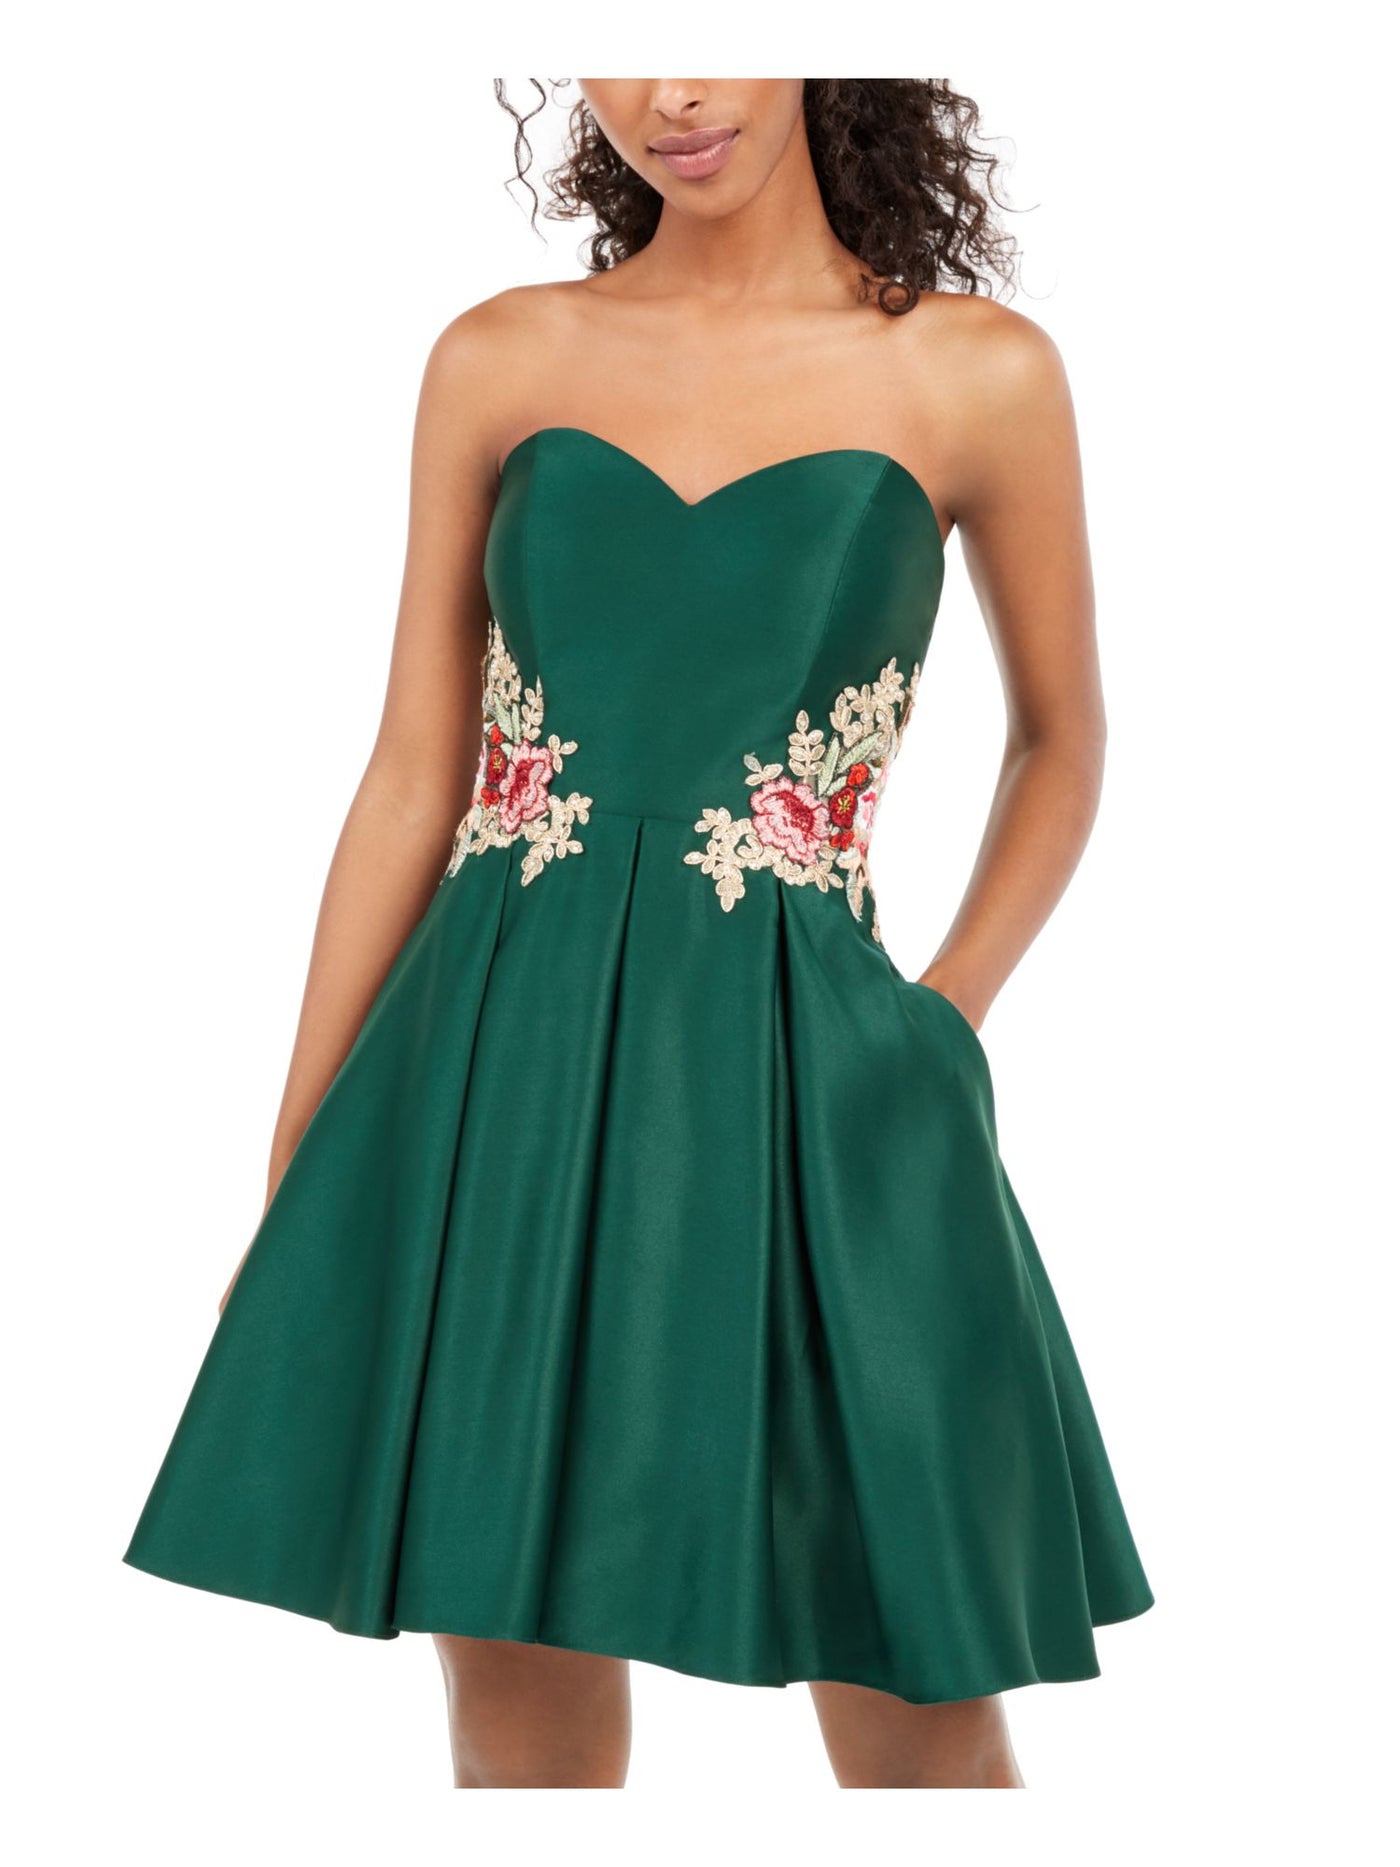 BLONDIE Womens Green Embellished Floral Sweetheart Neckline Above The Knee Party Fit + Flare Dress Juniors 9